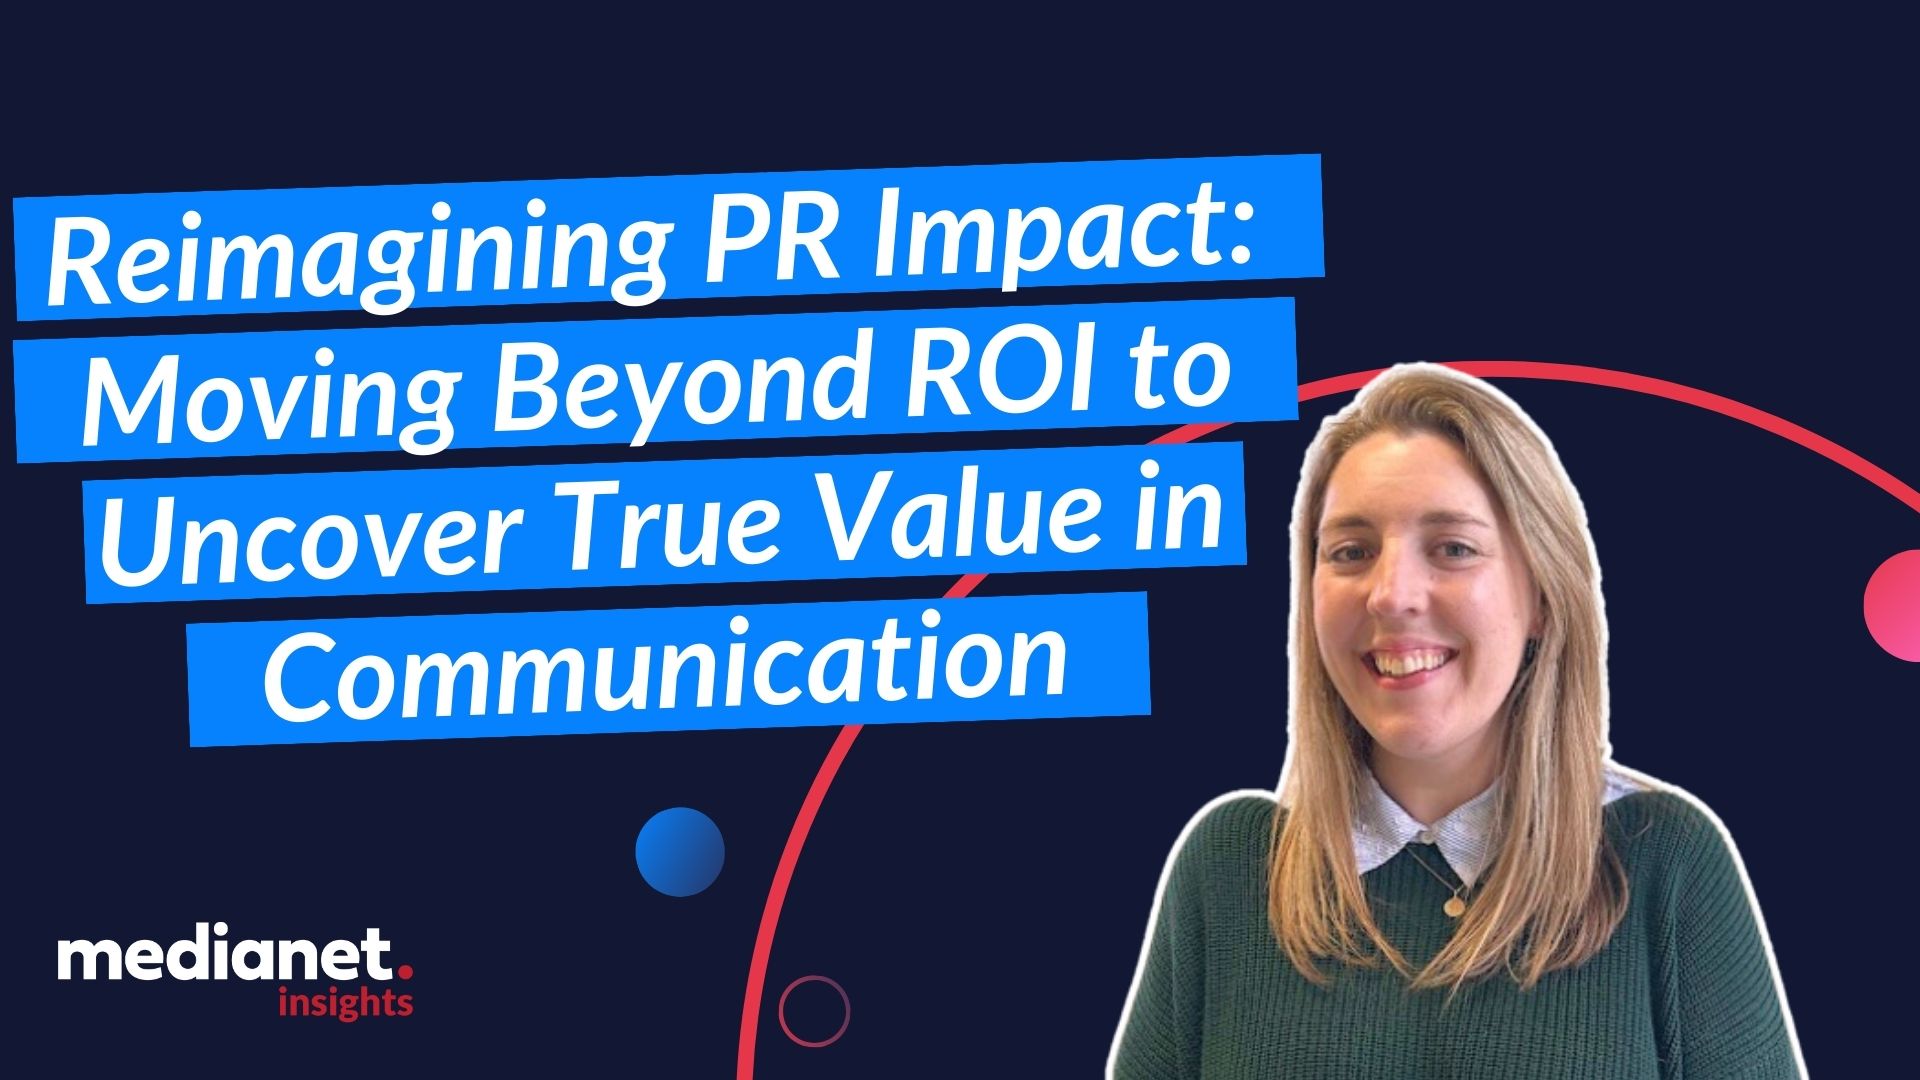 Reimagining PR Impact: Moving Beyond ROI to Uncover True Value in Communication